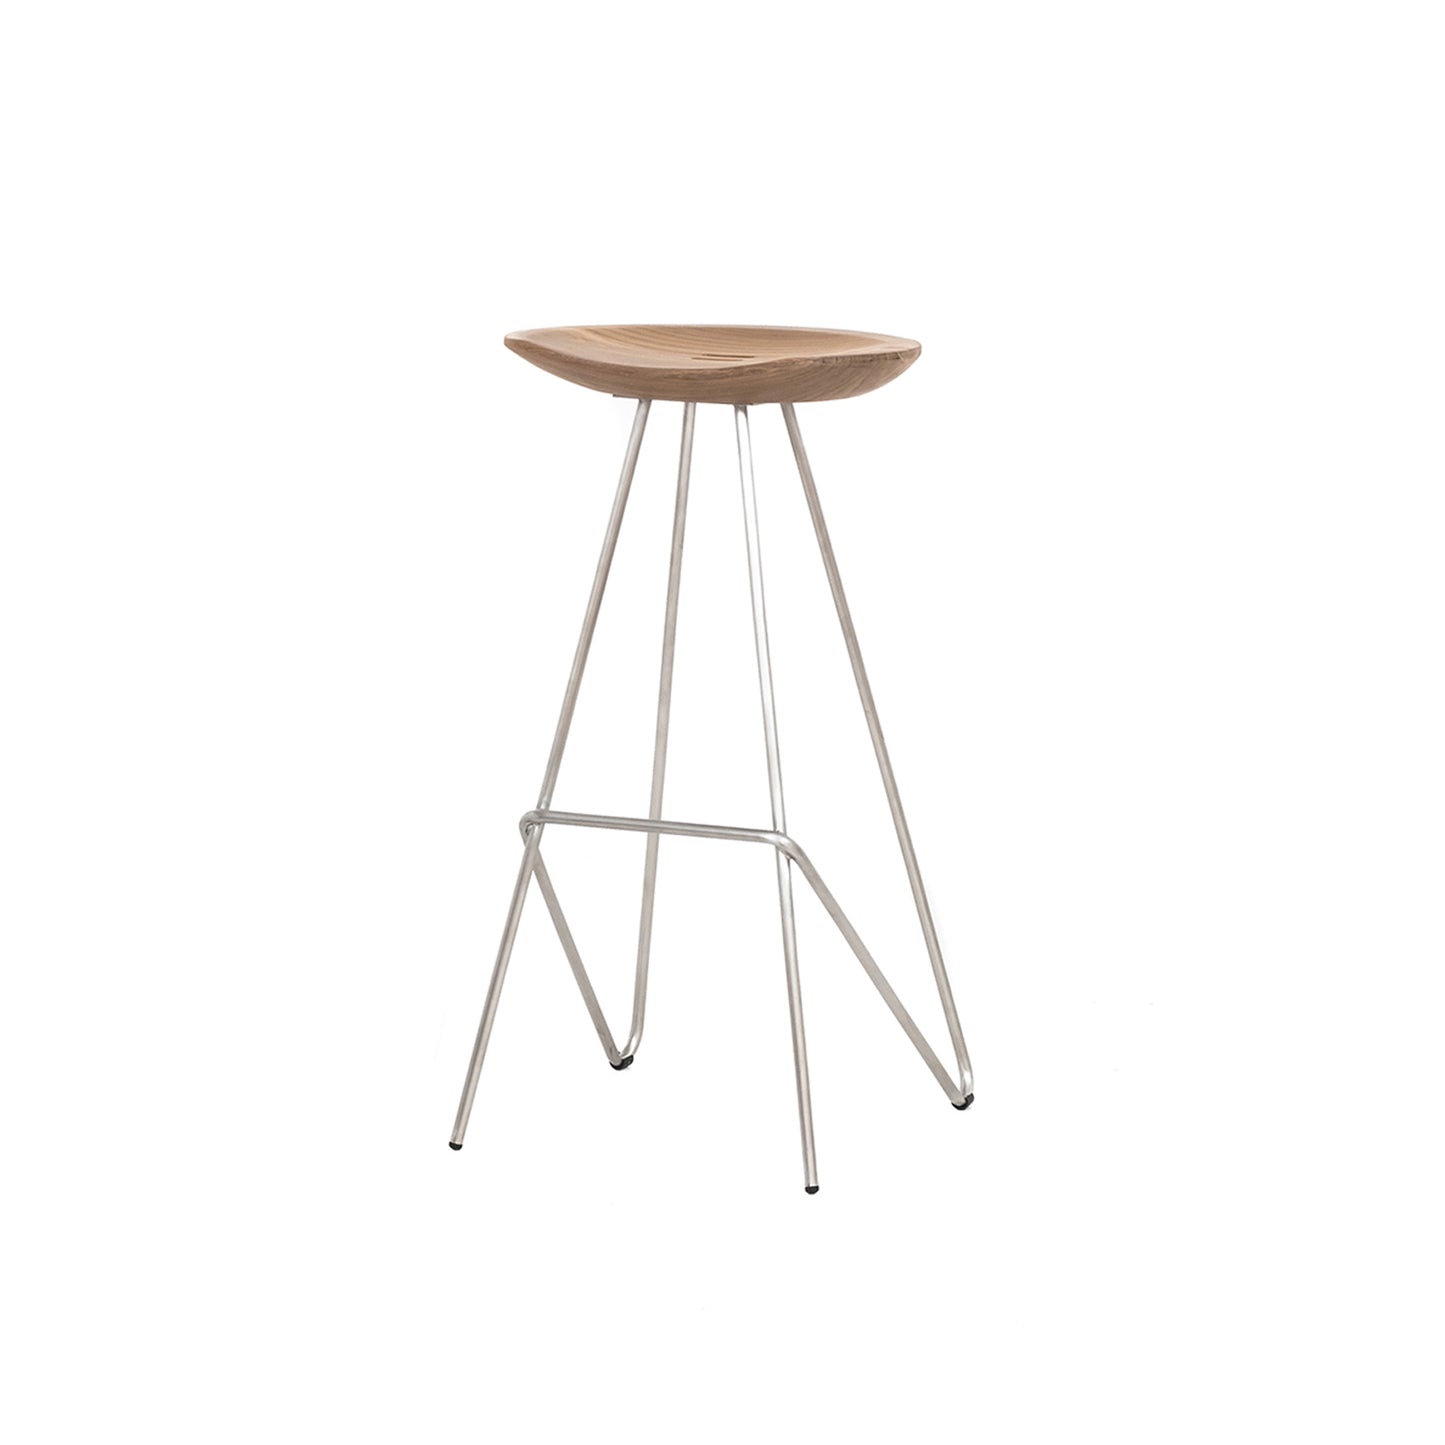 Perch Stool- Stainless Steel